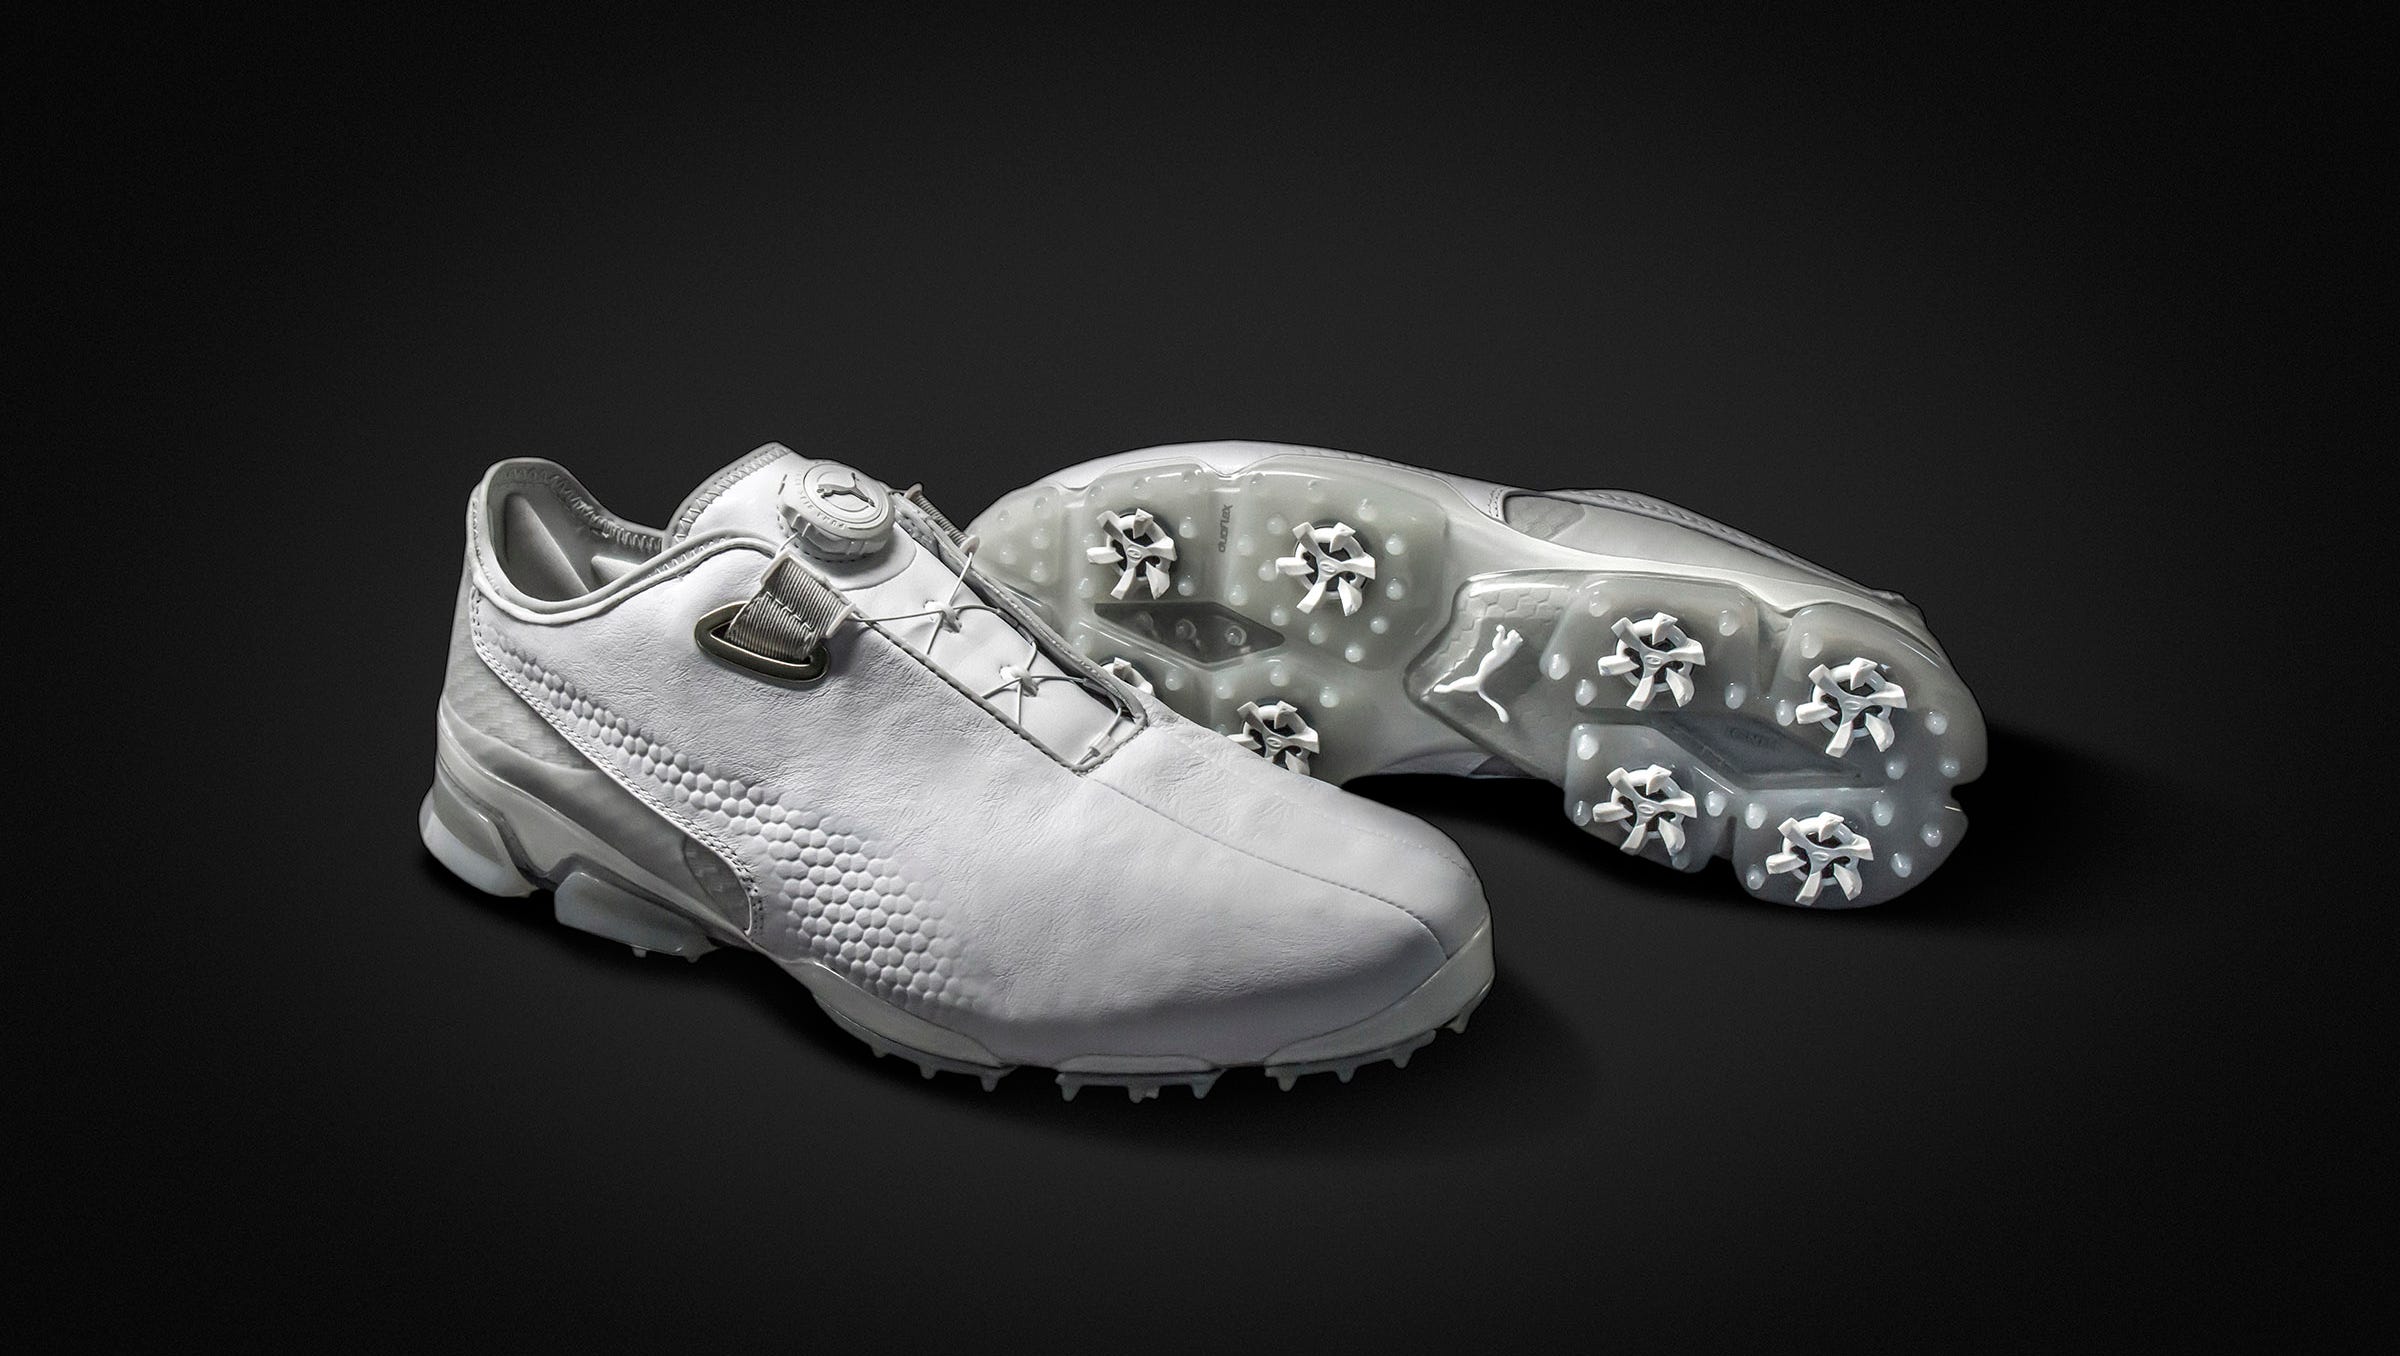 Gear: PUMA's DISC series of shoes